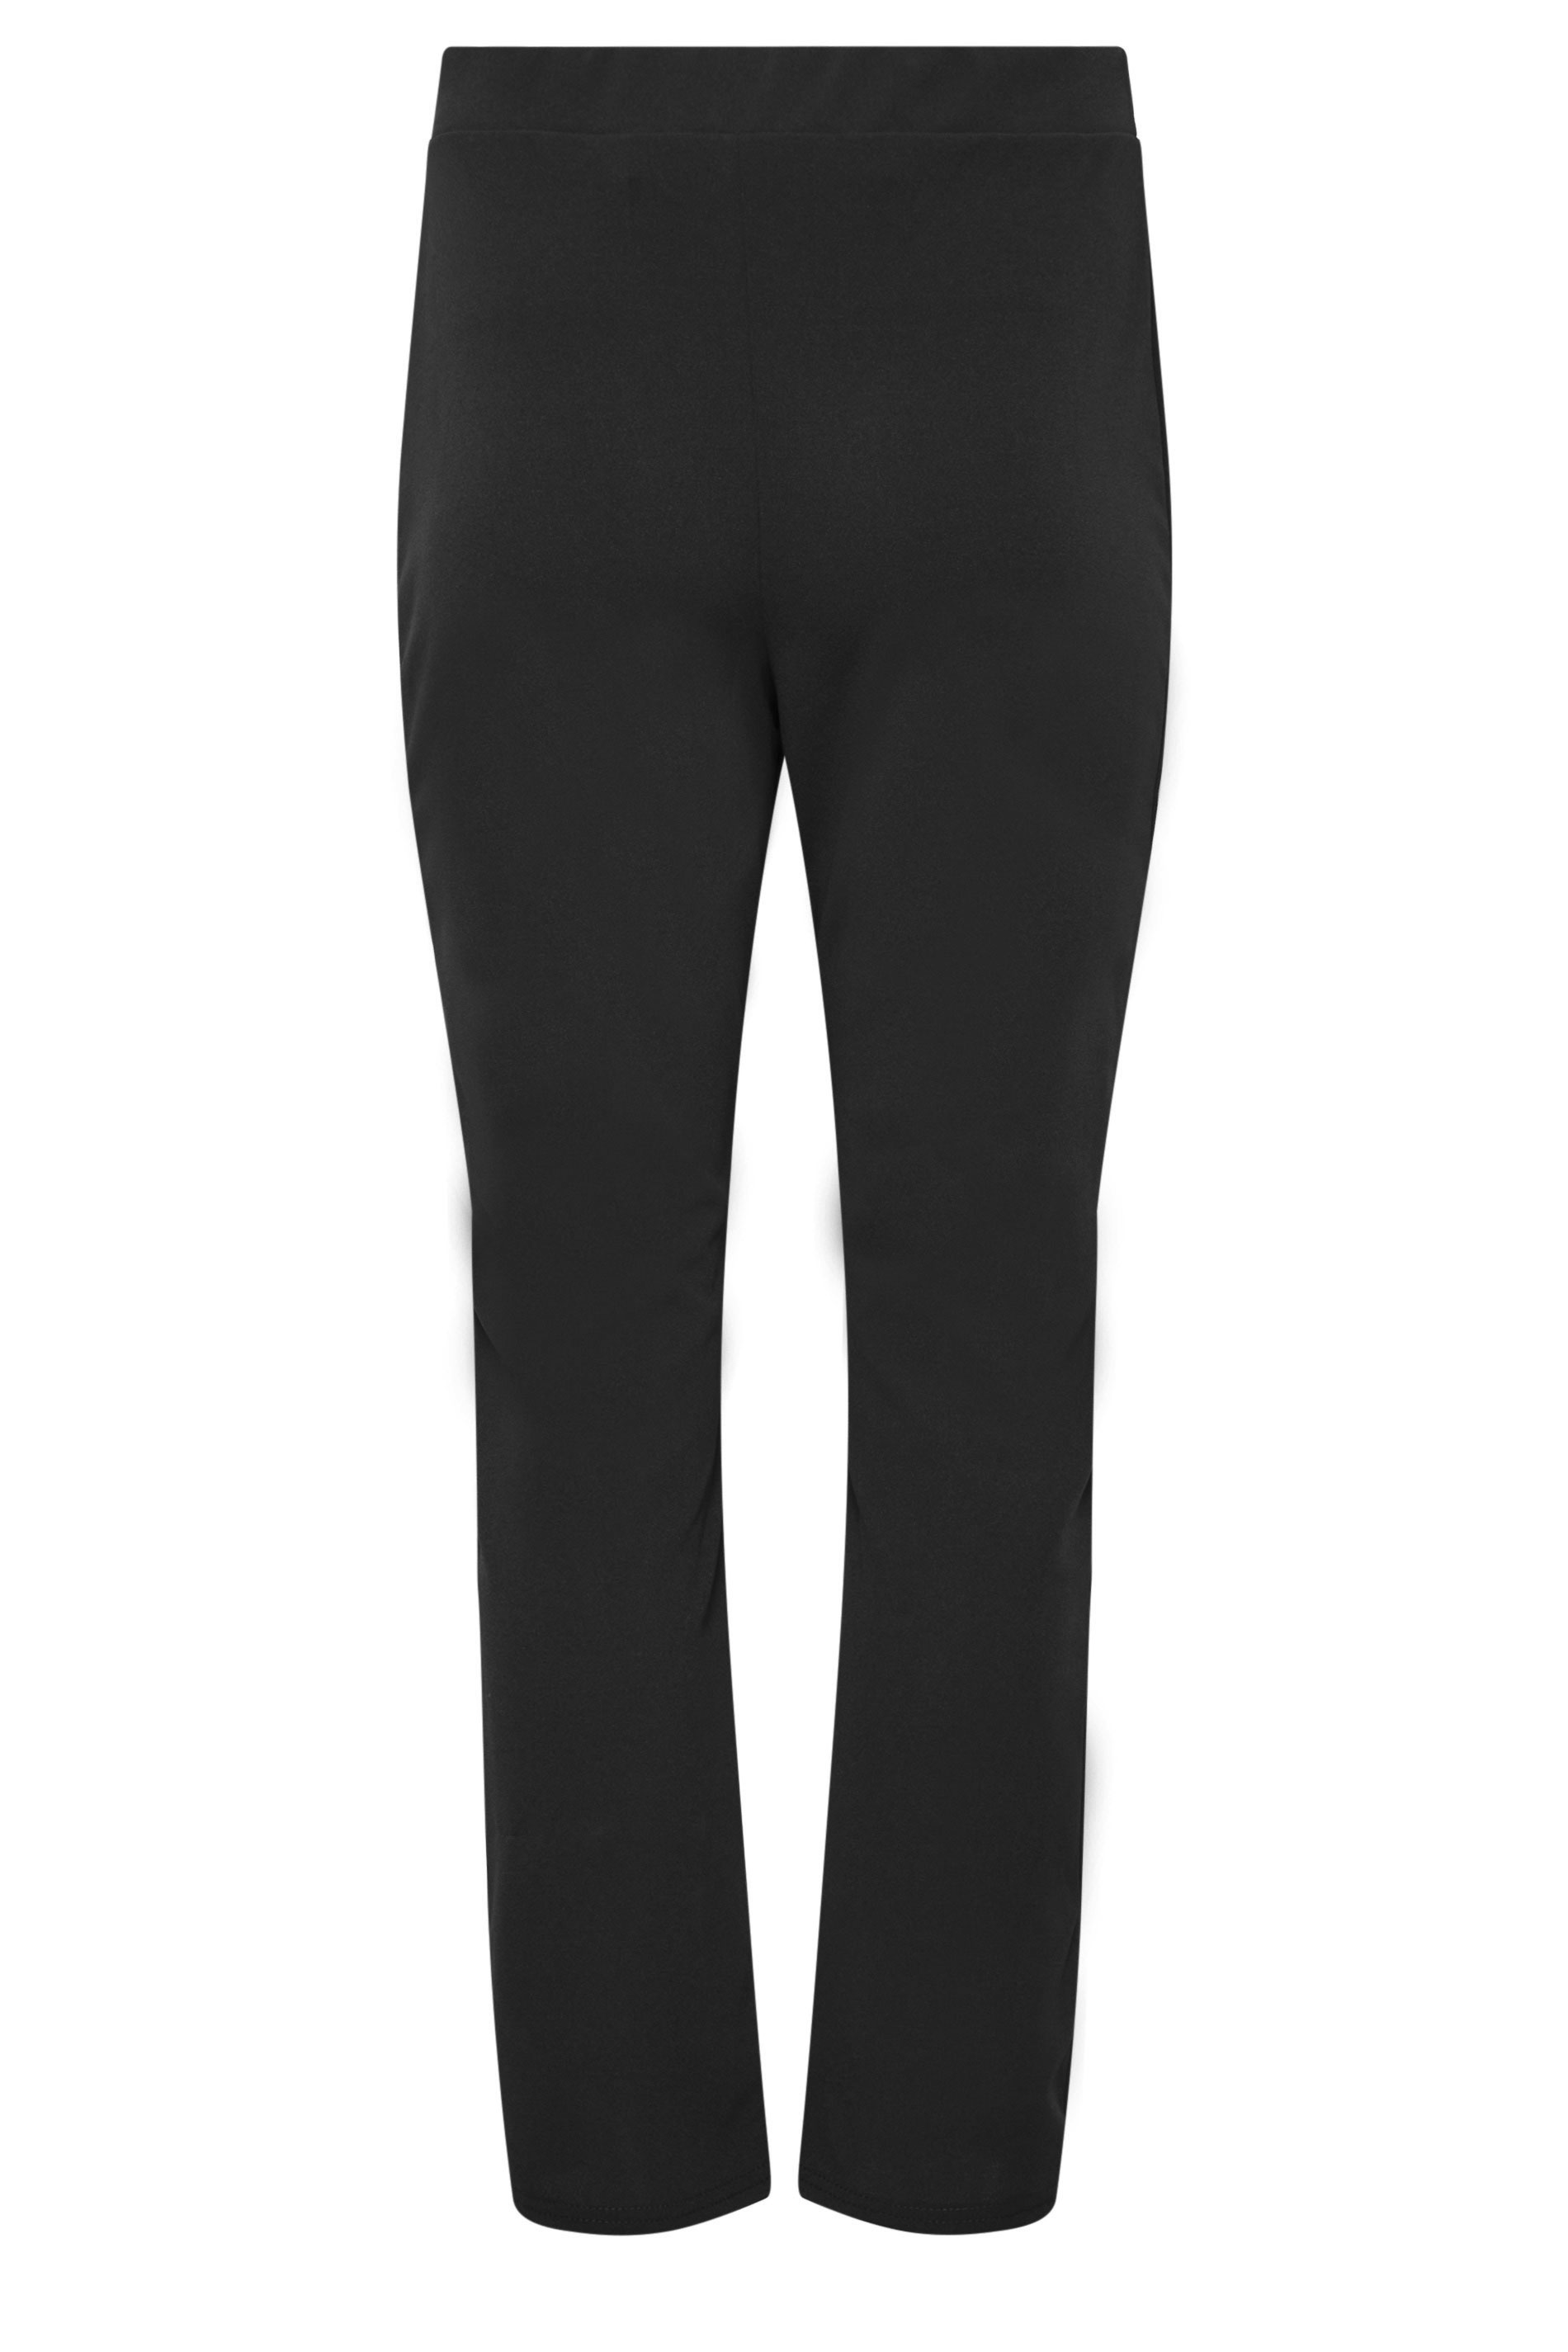 Linen-blend tapered trousers - Black - Ladies | H&M IN